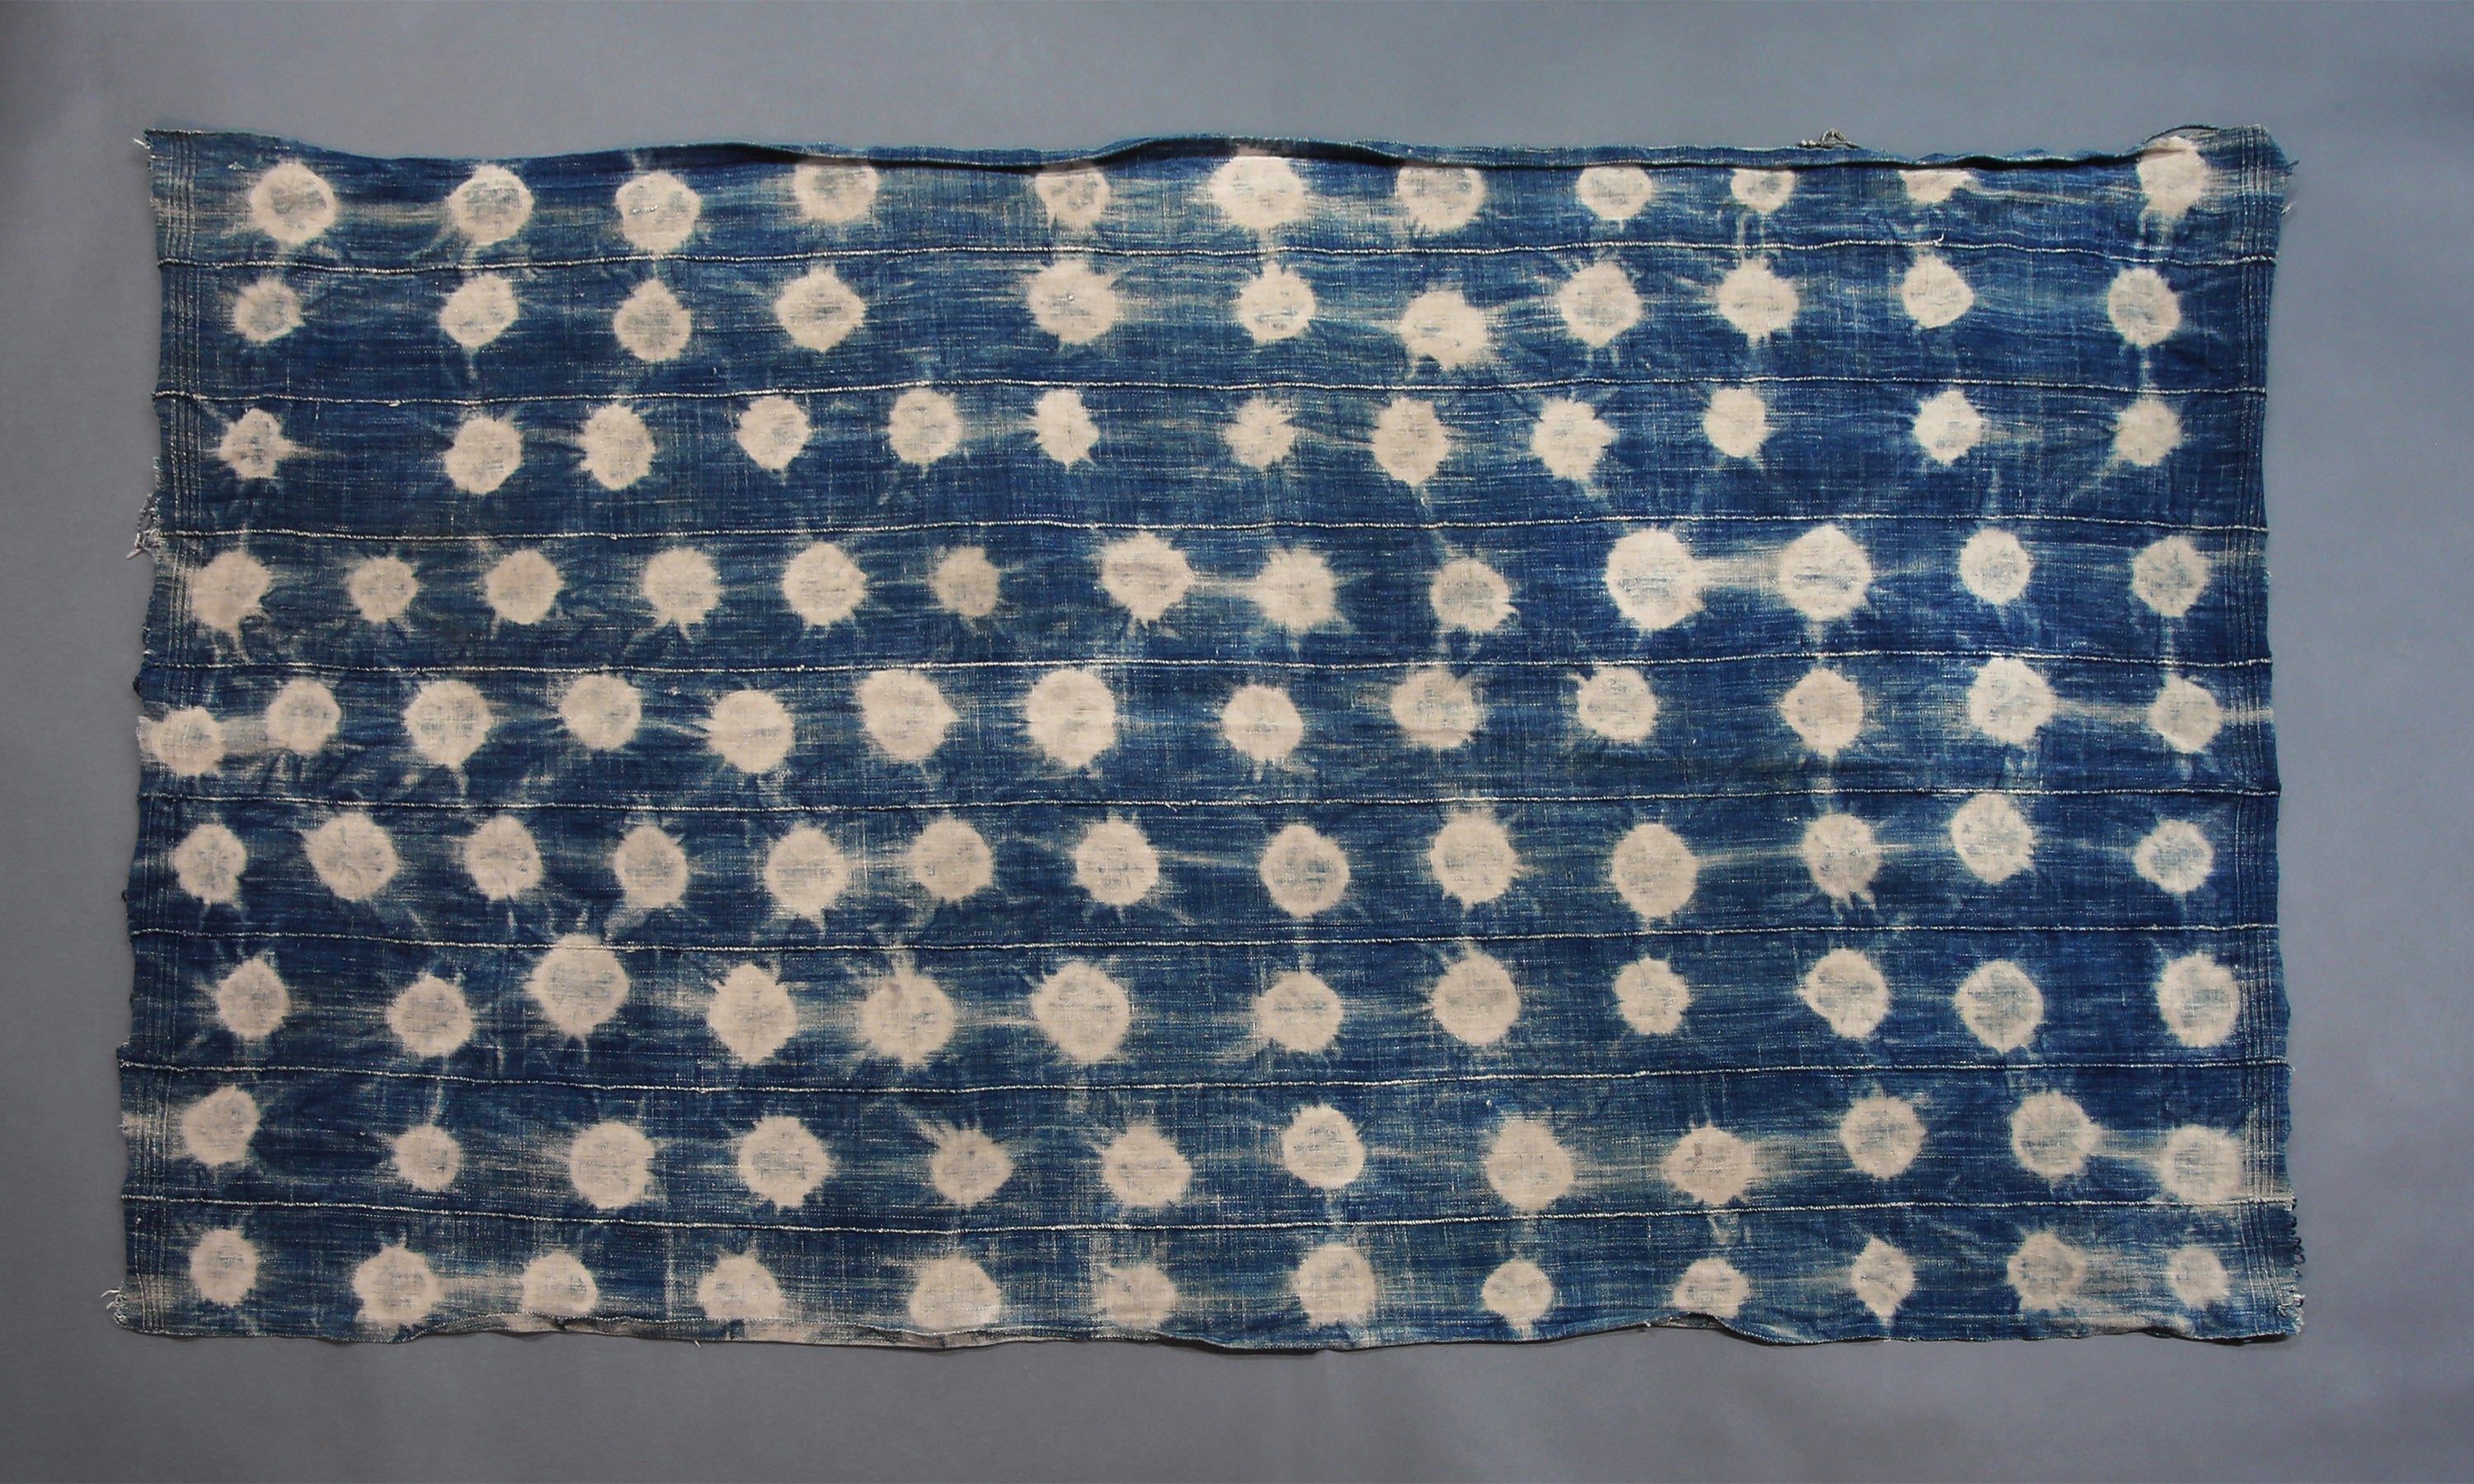 Handcrafted Textiles - Handmade - Vintage -  African Art - Indigo Dyed -  Cotton - Scarf Shawl -  Faded Blue - Tie Dye